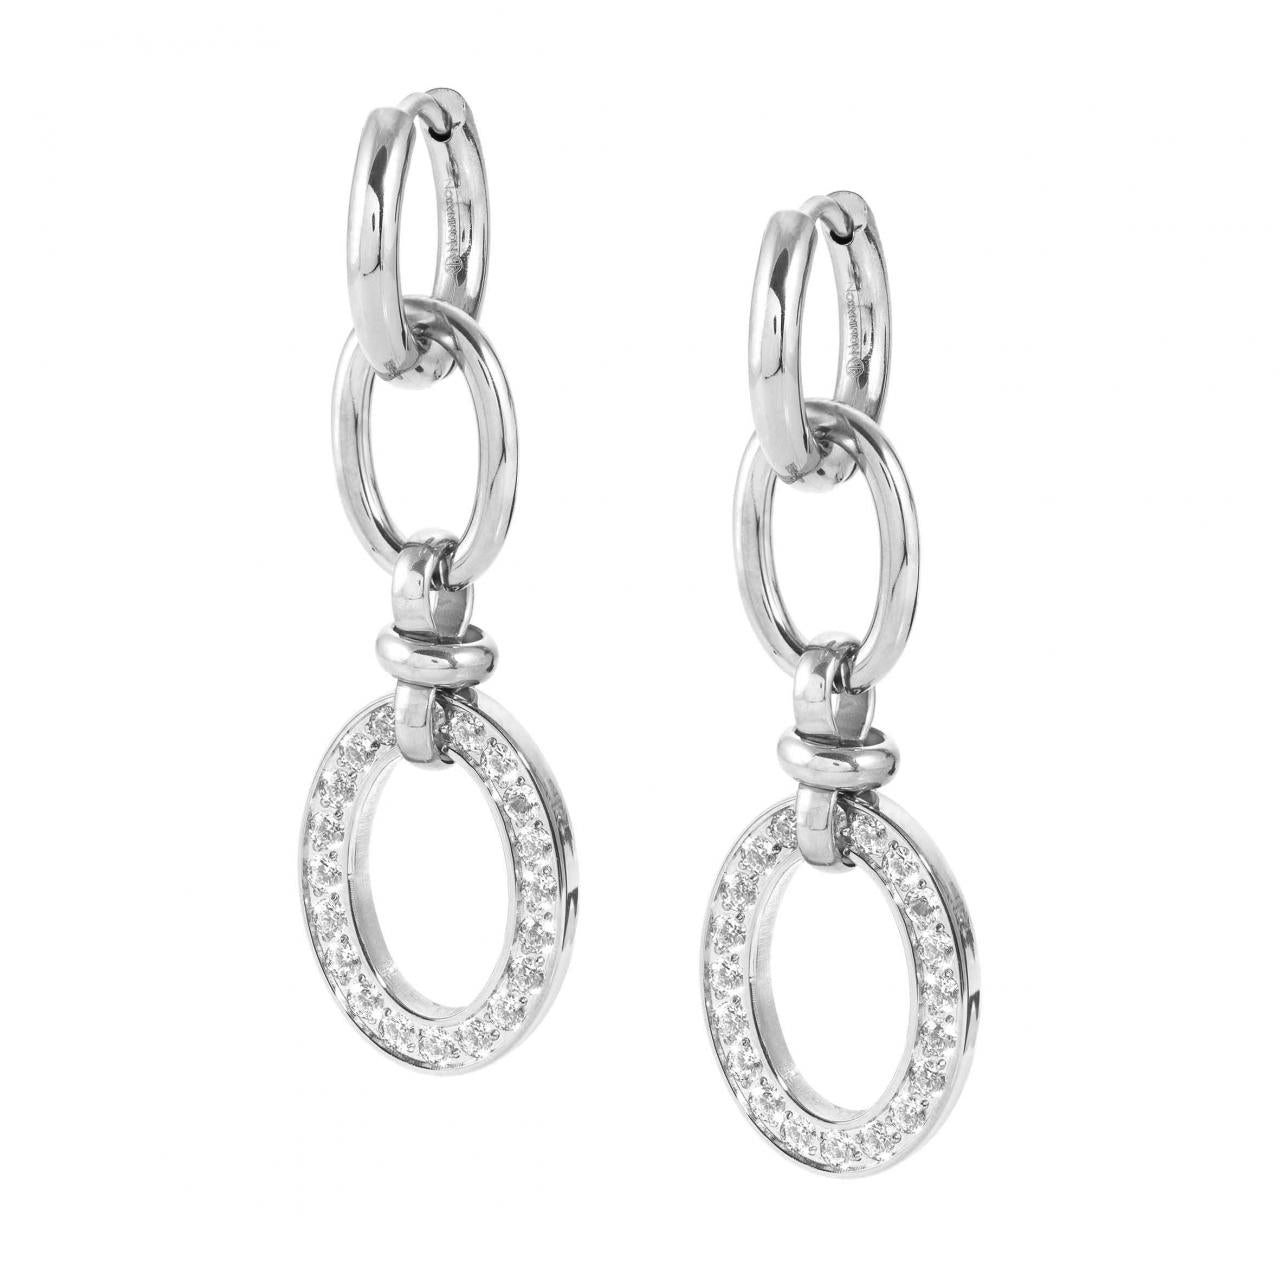 Affinity stainless steel chain drop earrings